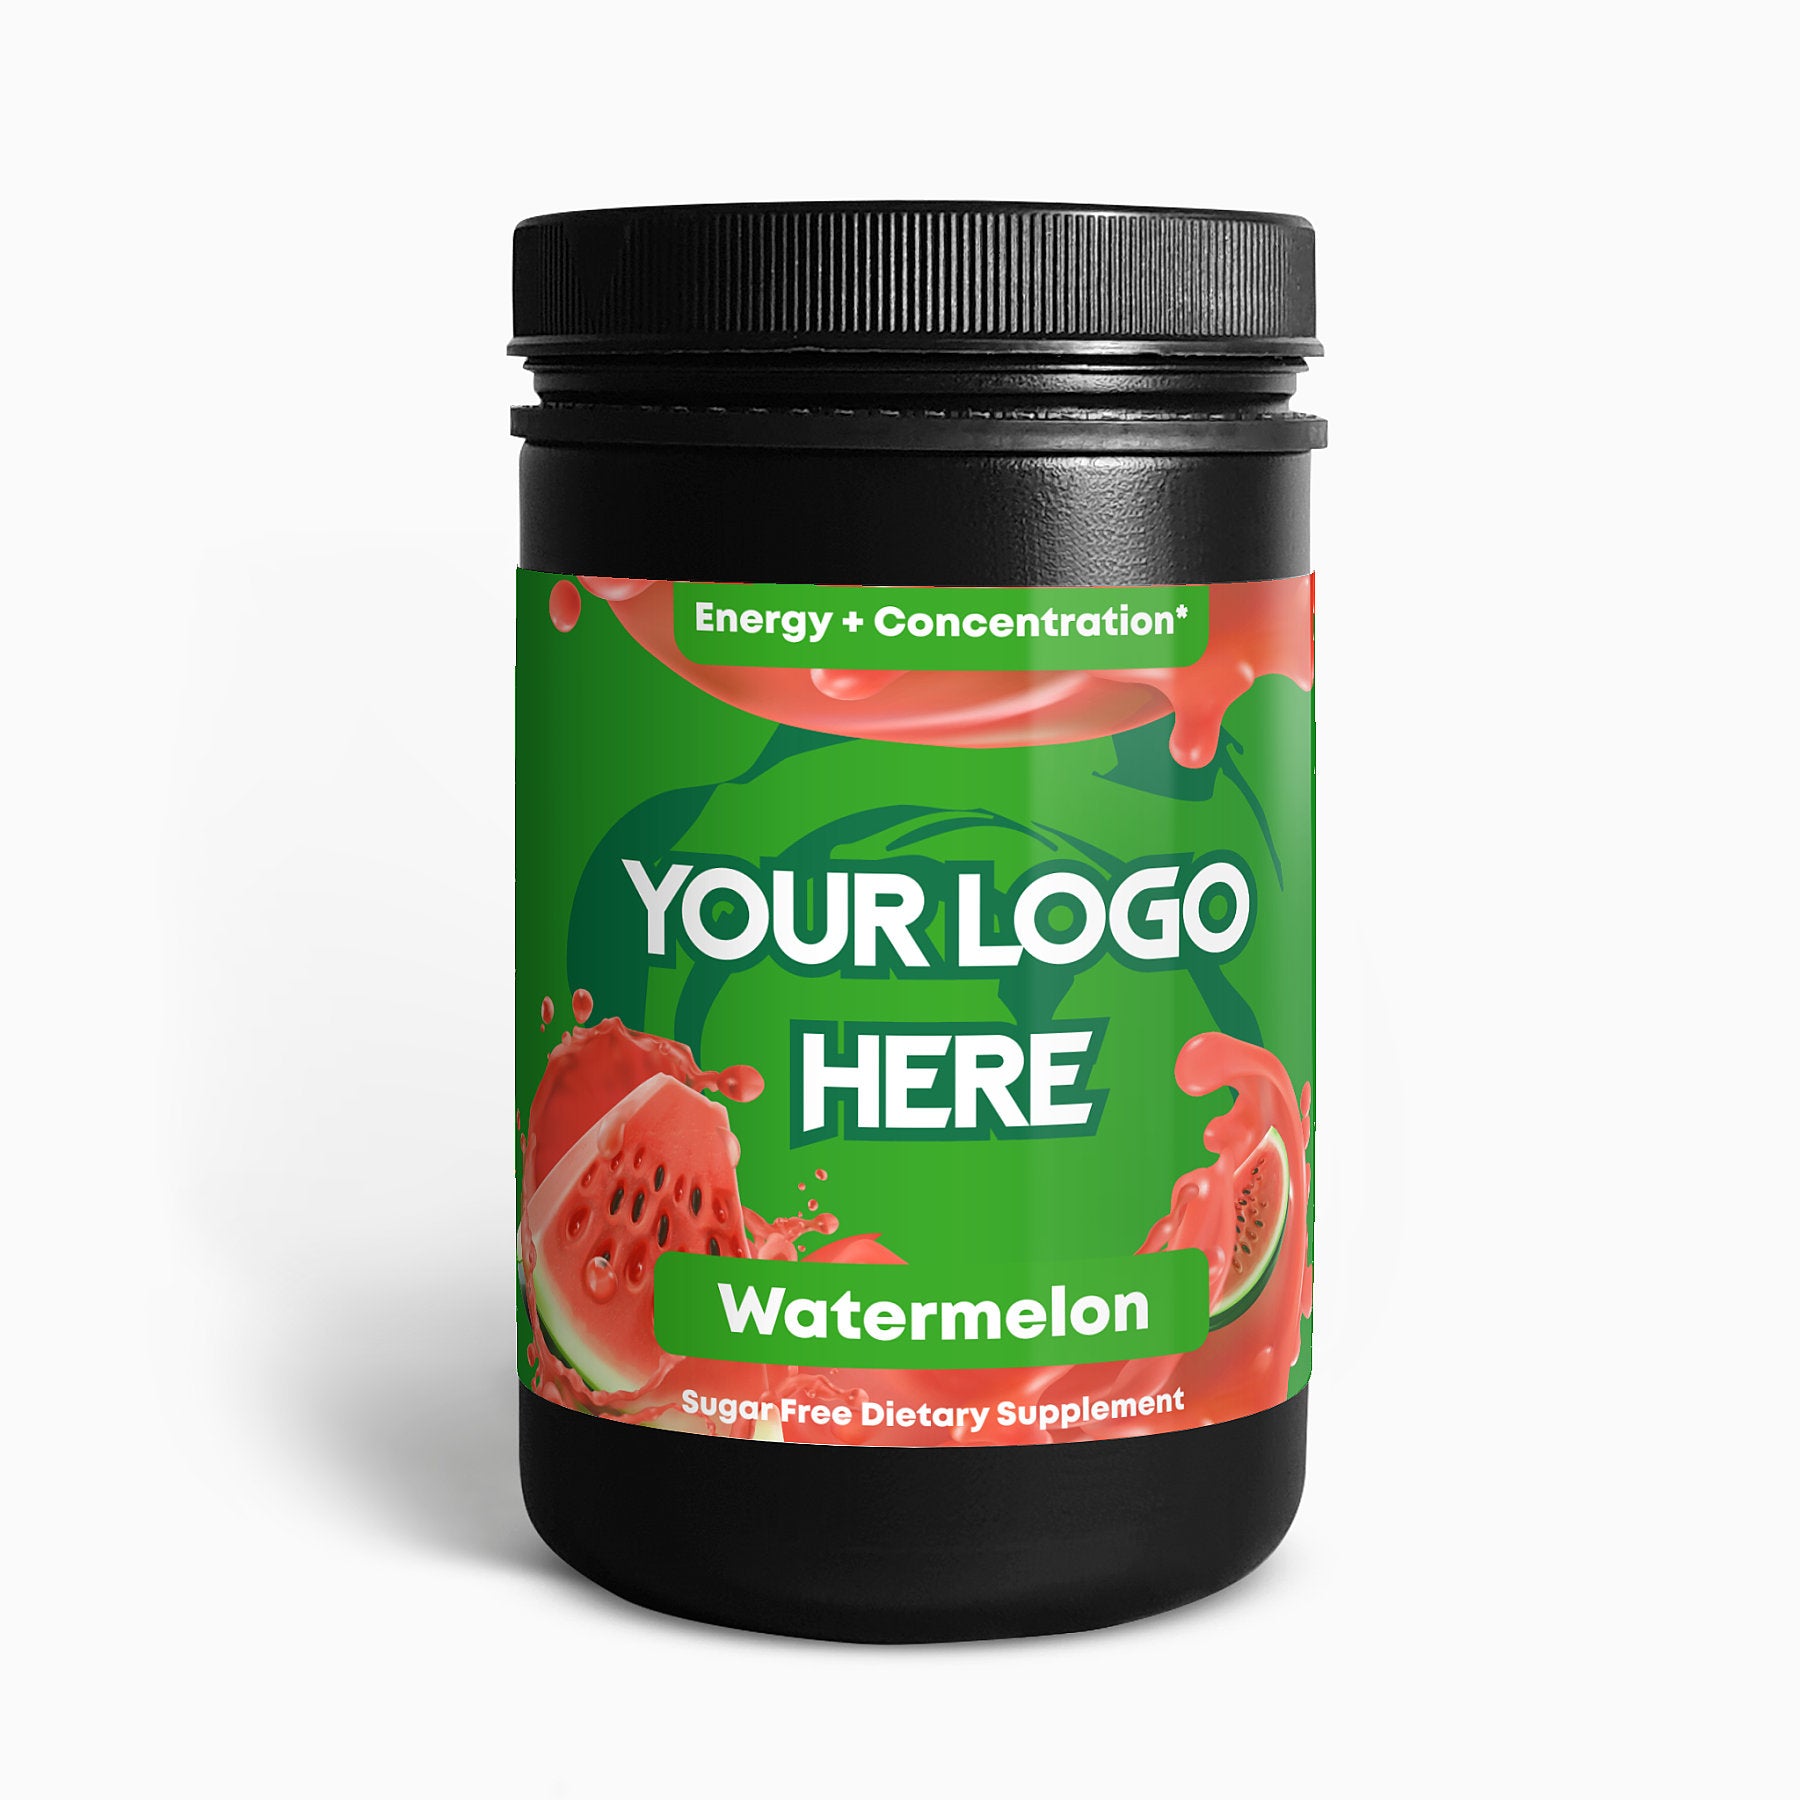 Launch Your Own Branded Energy Formula - Watermelon